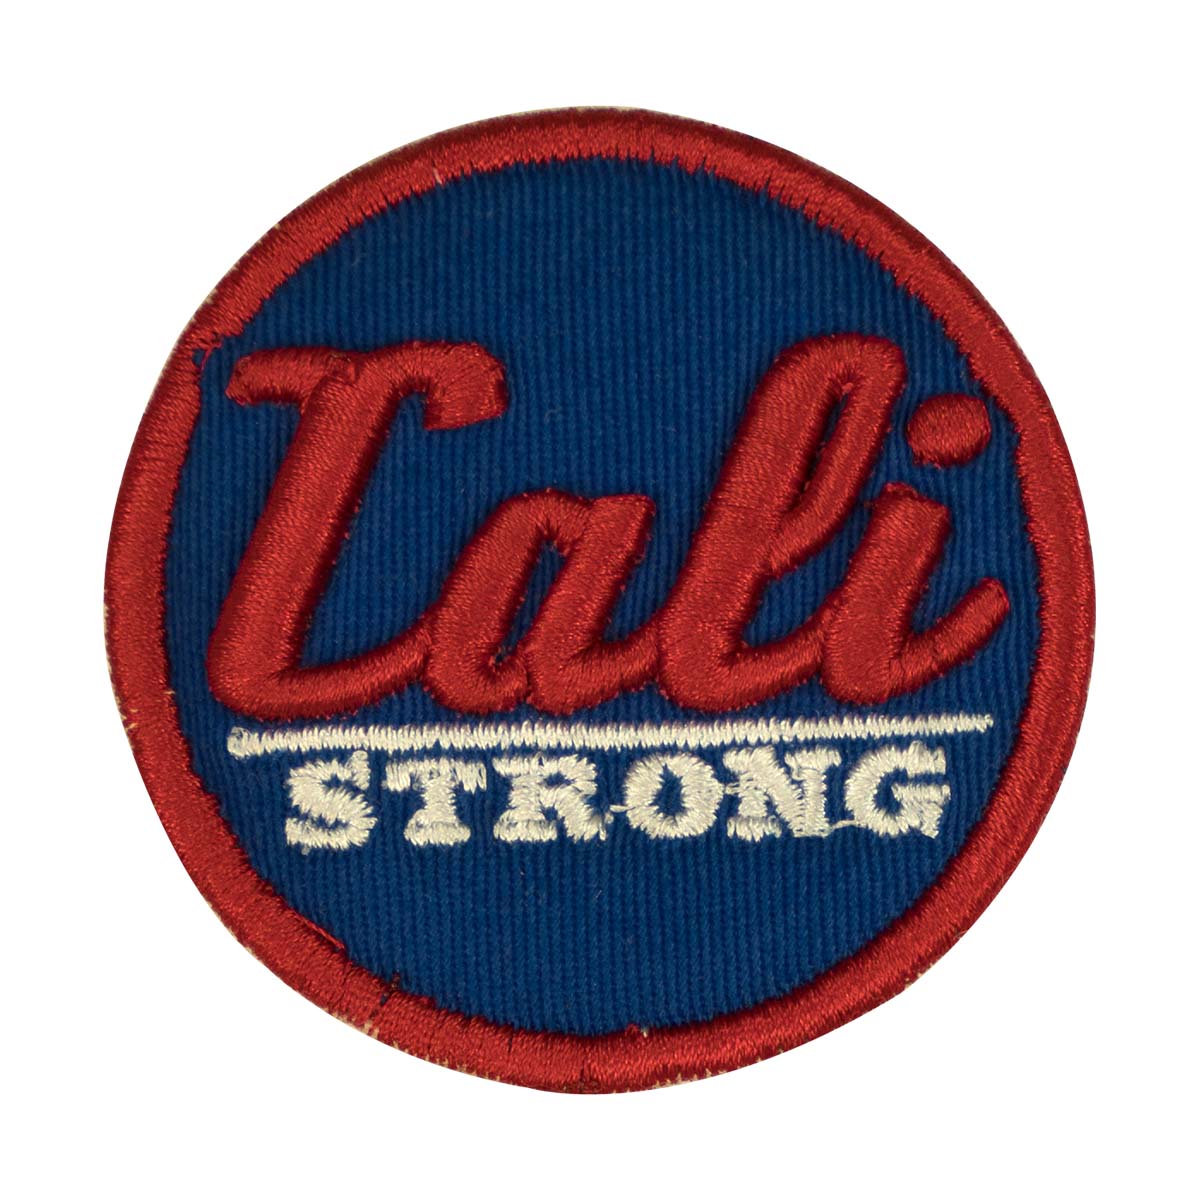 CALI Strong Red White Blue Round 3D Embroidered Hook-and-Loop Morale Patch - Patches - Image 1 - CALI Strong